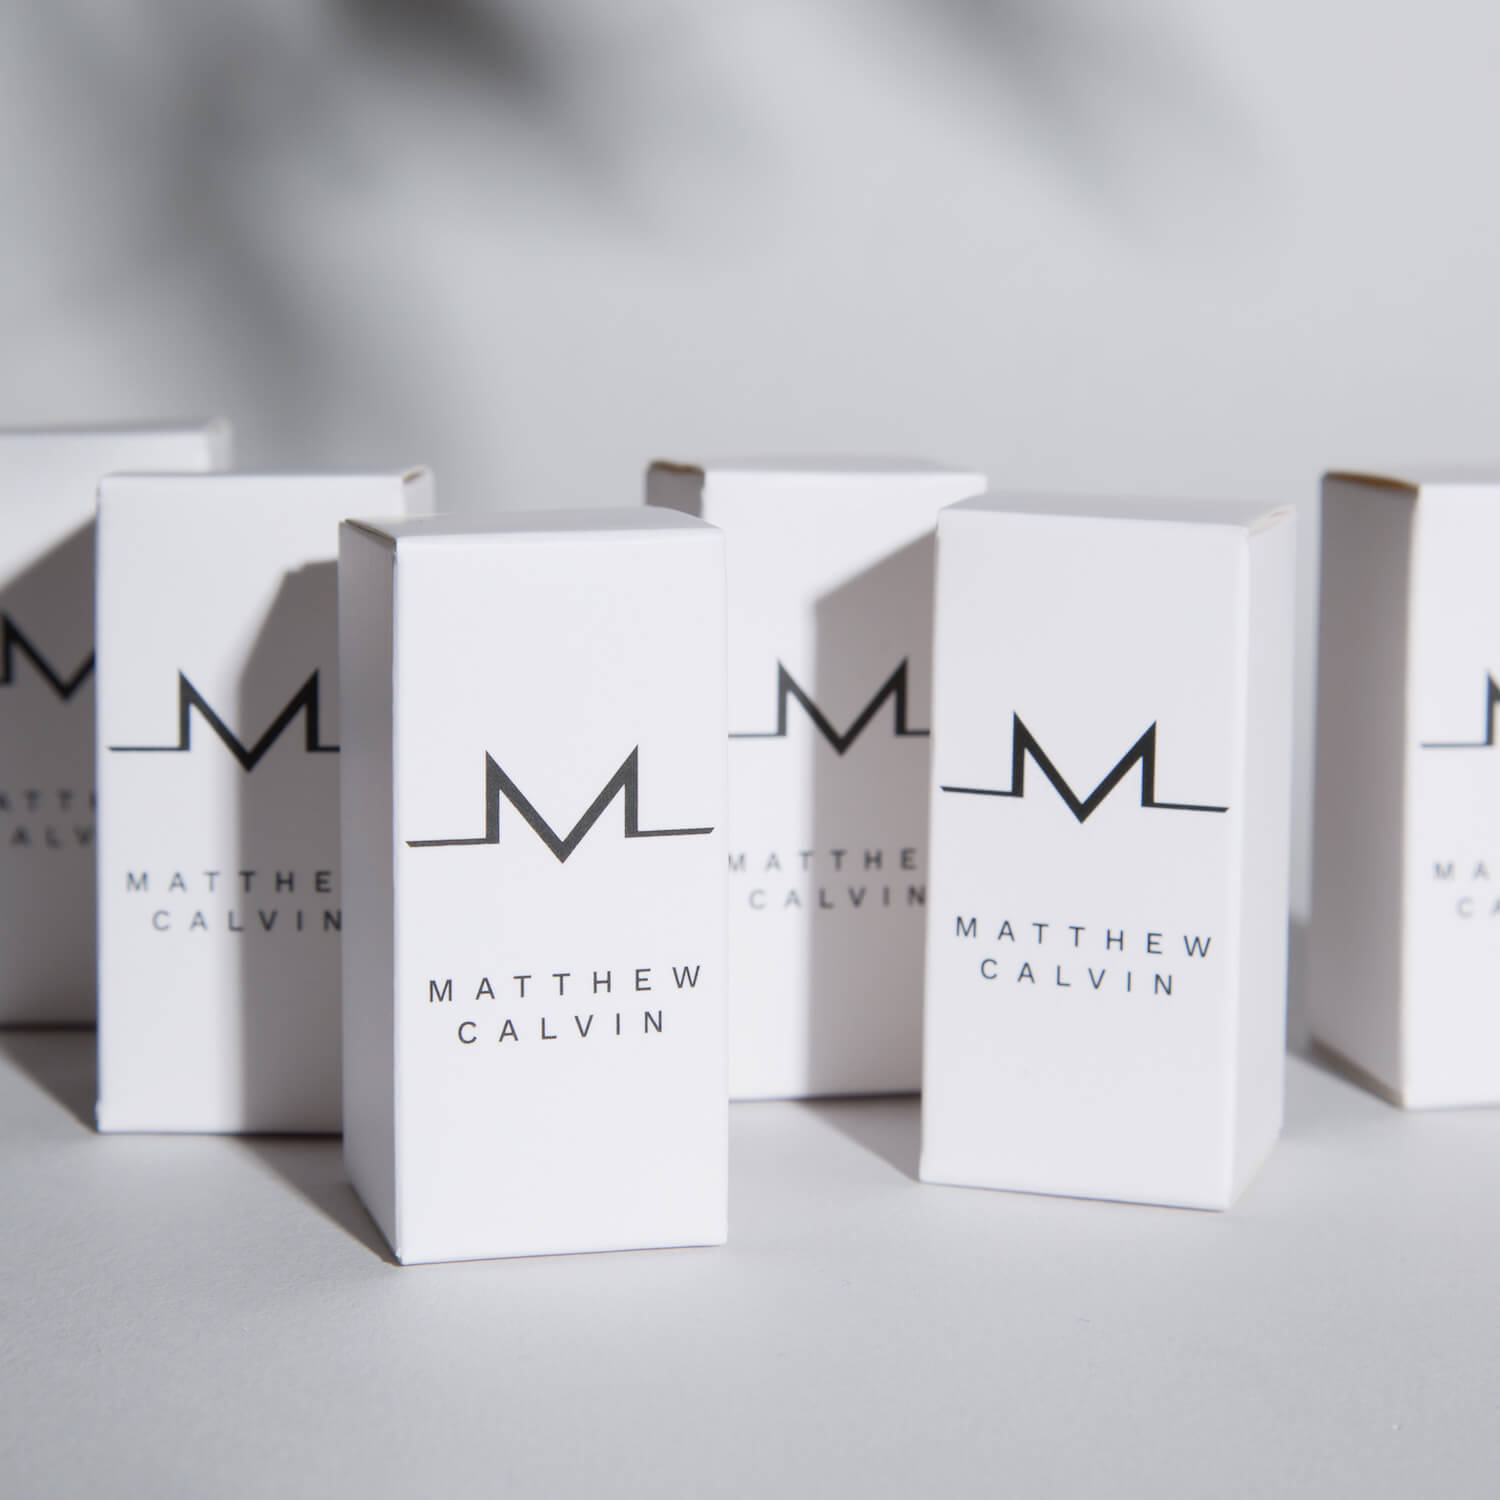 White gift boxes with M logo and Matthew Calvin written on them in black